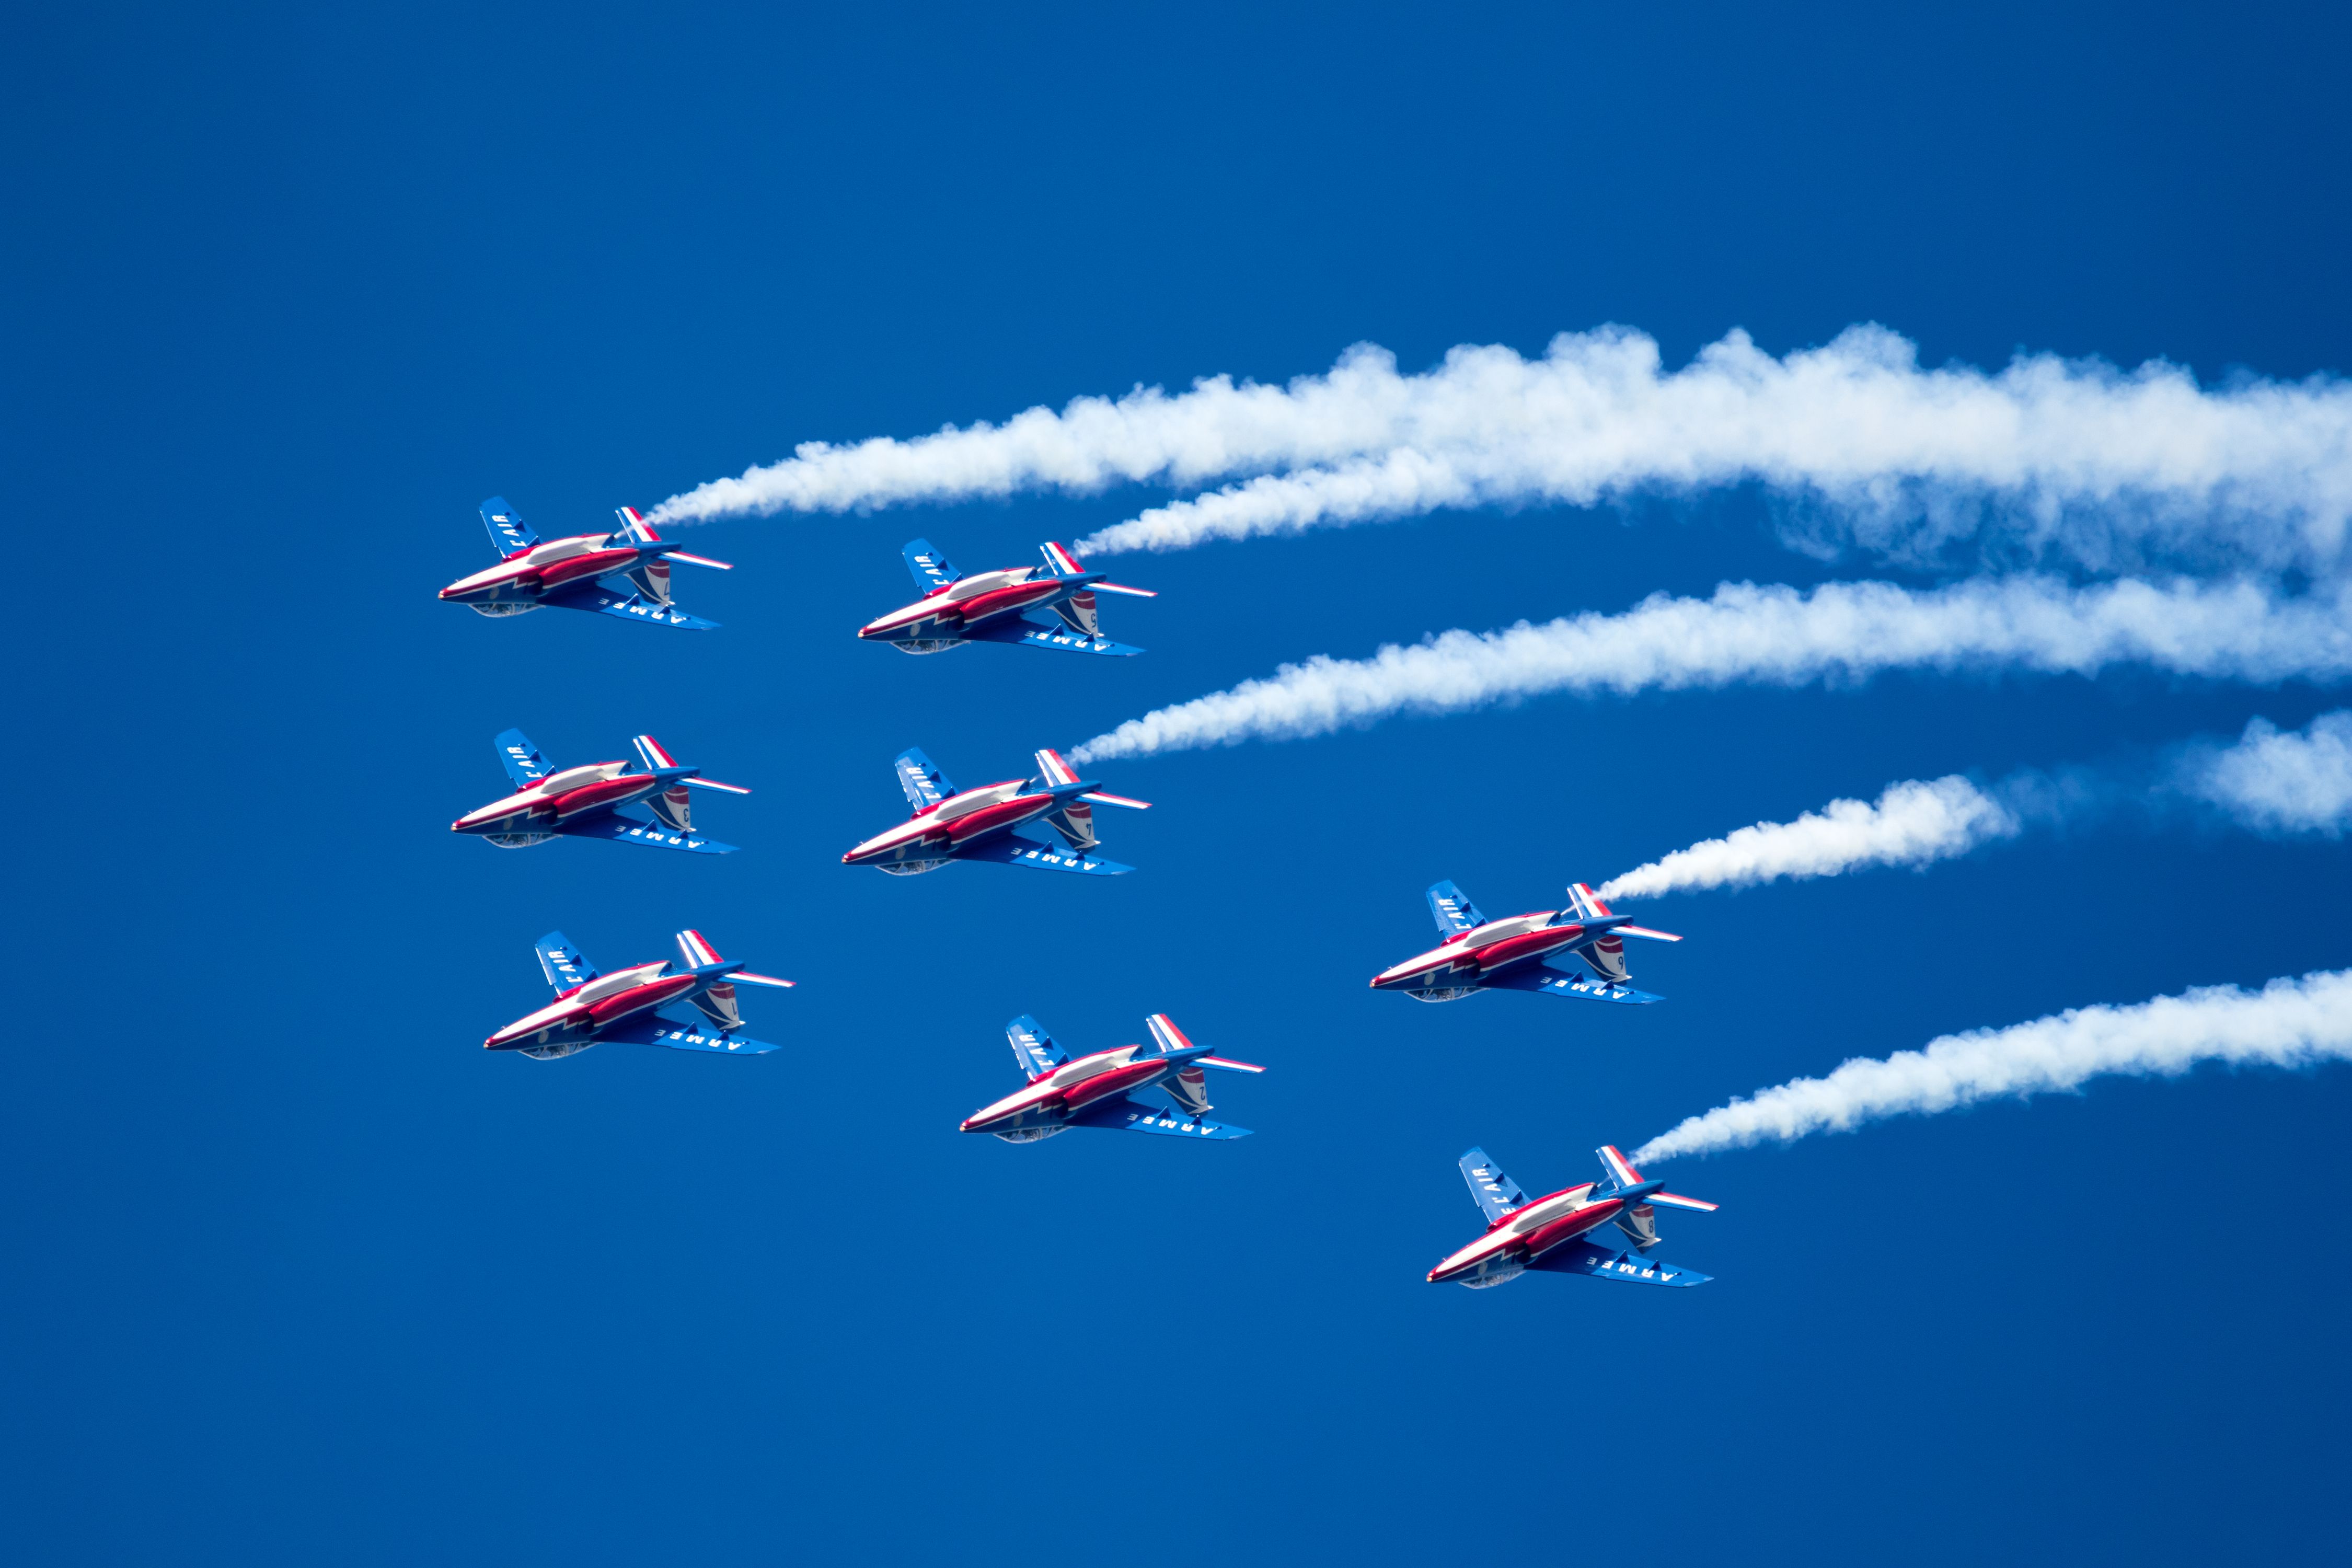 Patrouille de France flying demonstration team performing at the Paris Air Show.